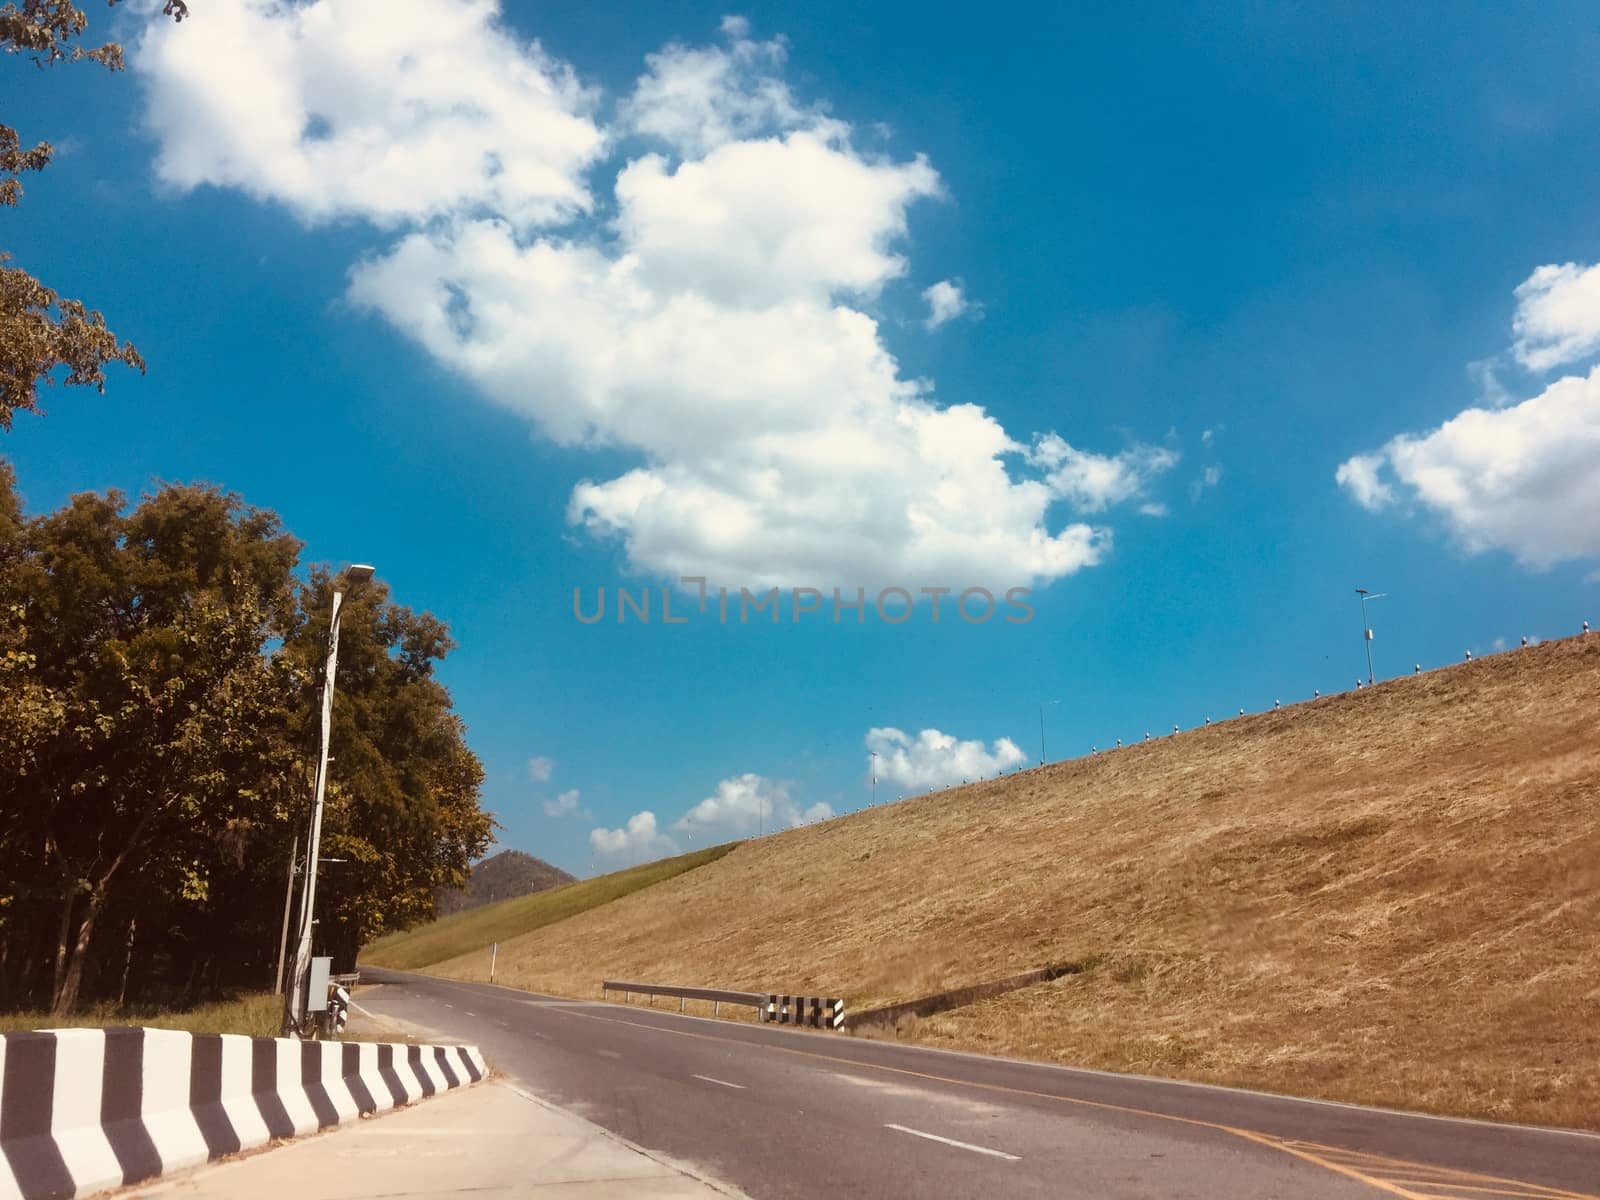 Rural country road amidst green trees with fluffy clouds and blue sky background for travelling and transportation concept